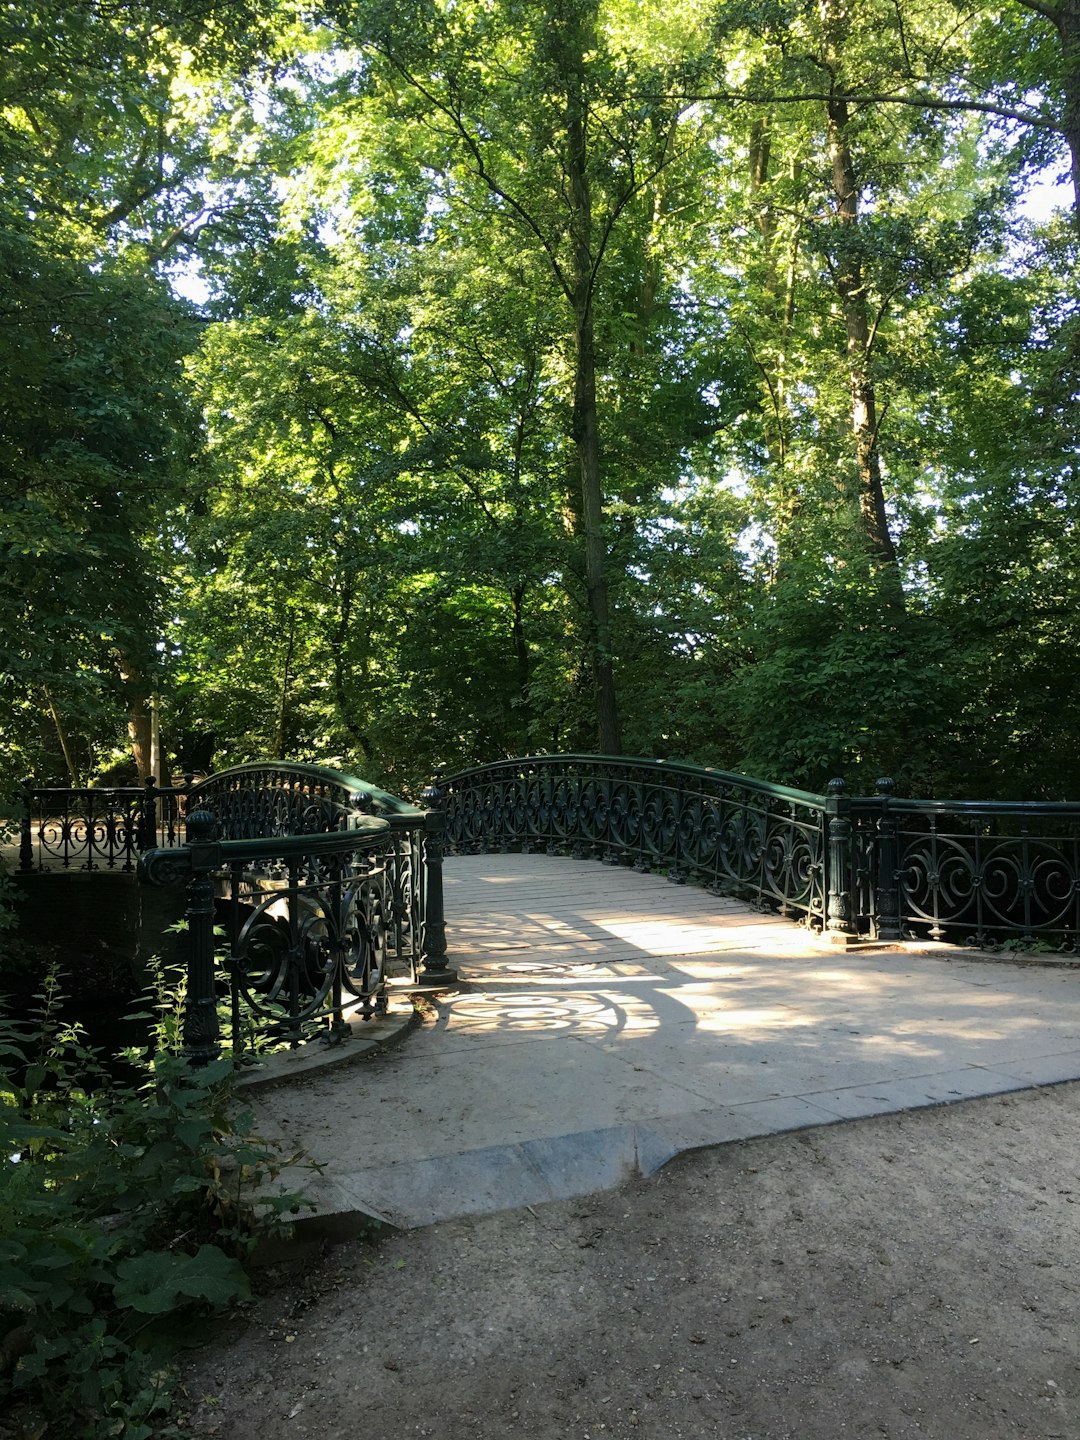 Travel Tips and Stories of Vondelpark in Netherlands